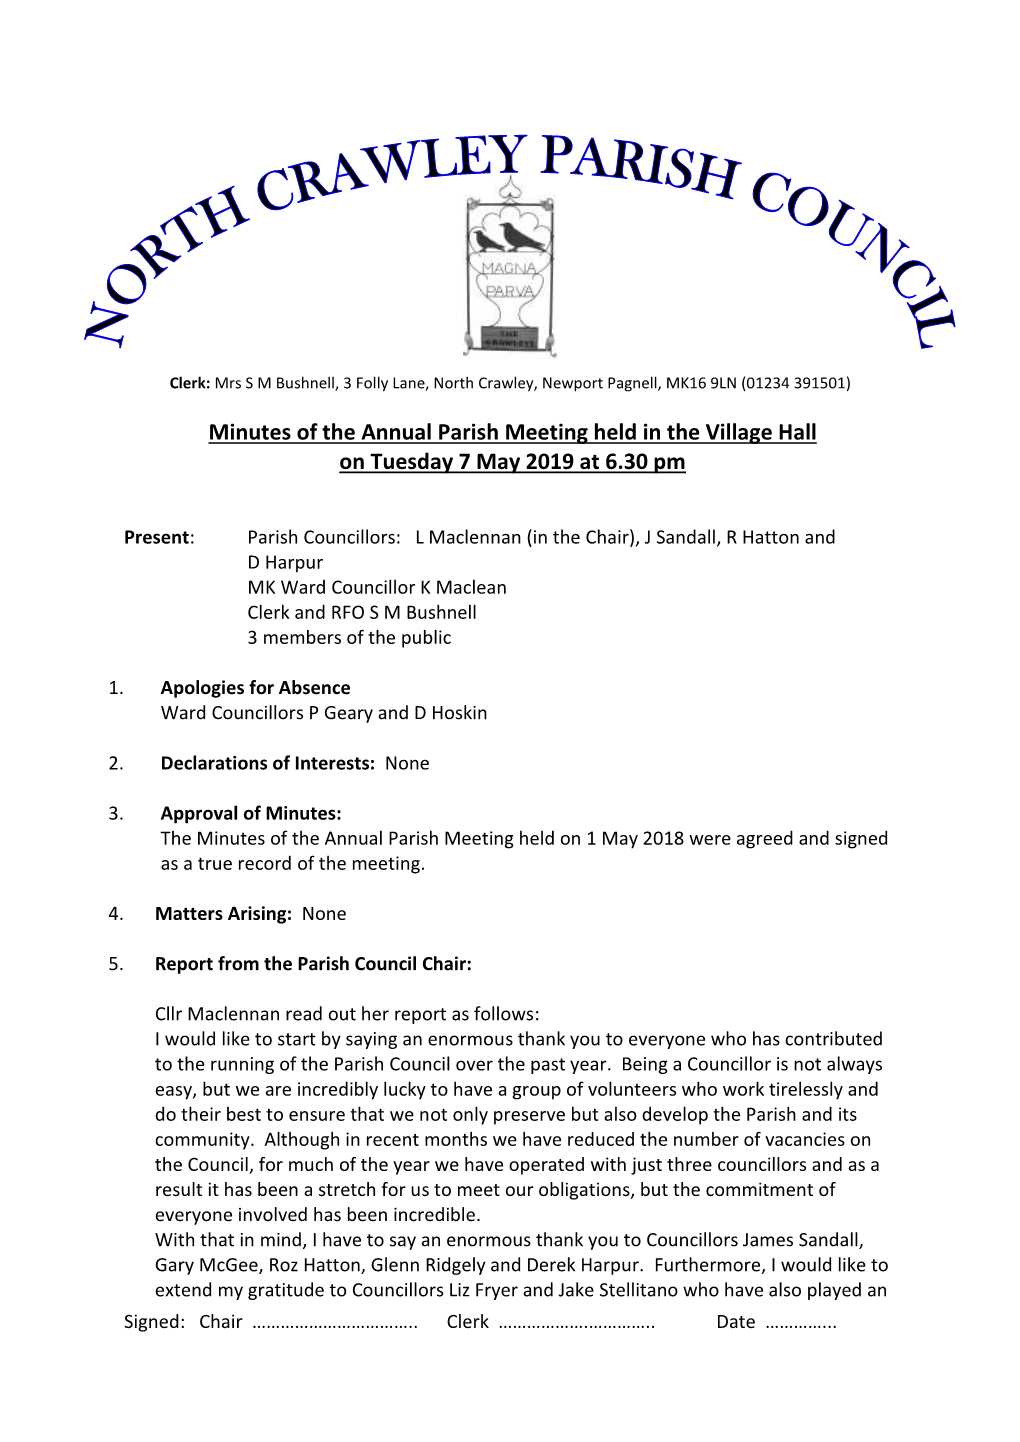 Minutes of the Annual Parish Meeting Held in the Village Hall on Tuesday 7 May 2019 at 6.30 Pm